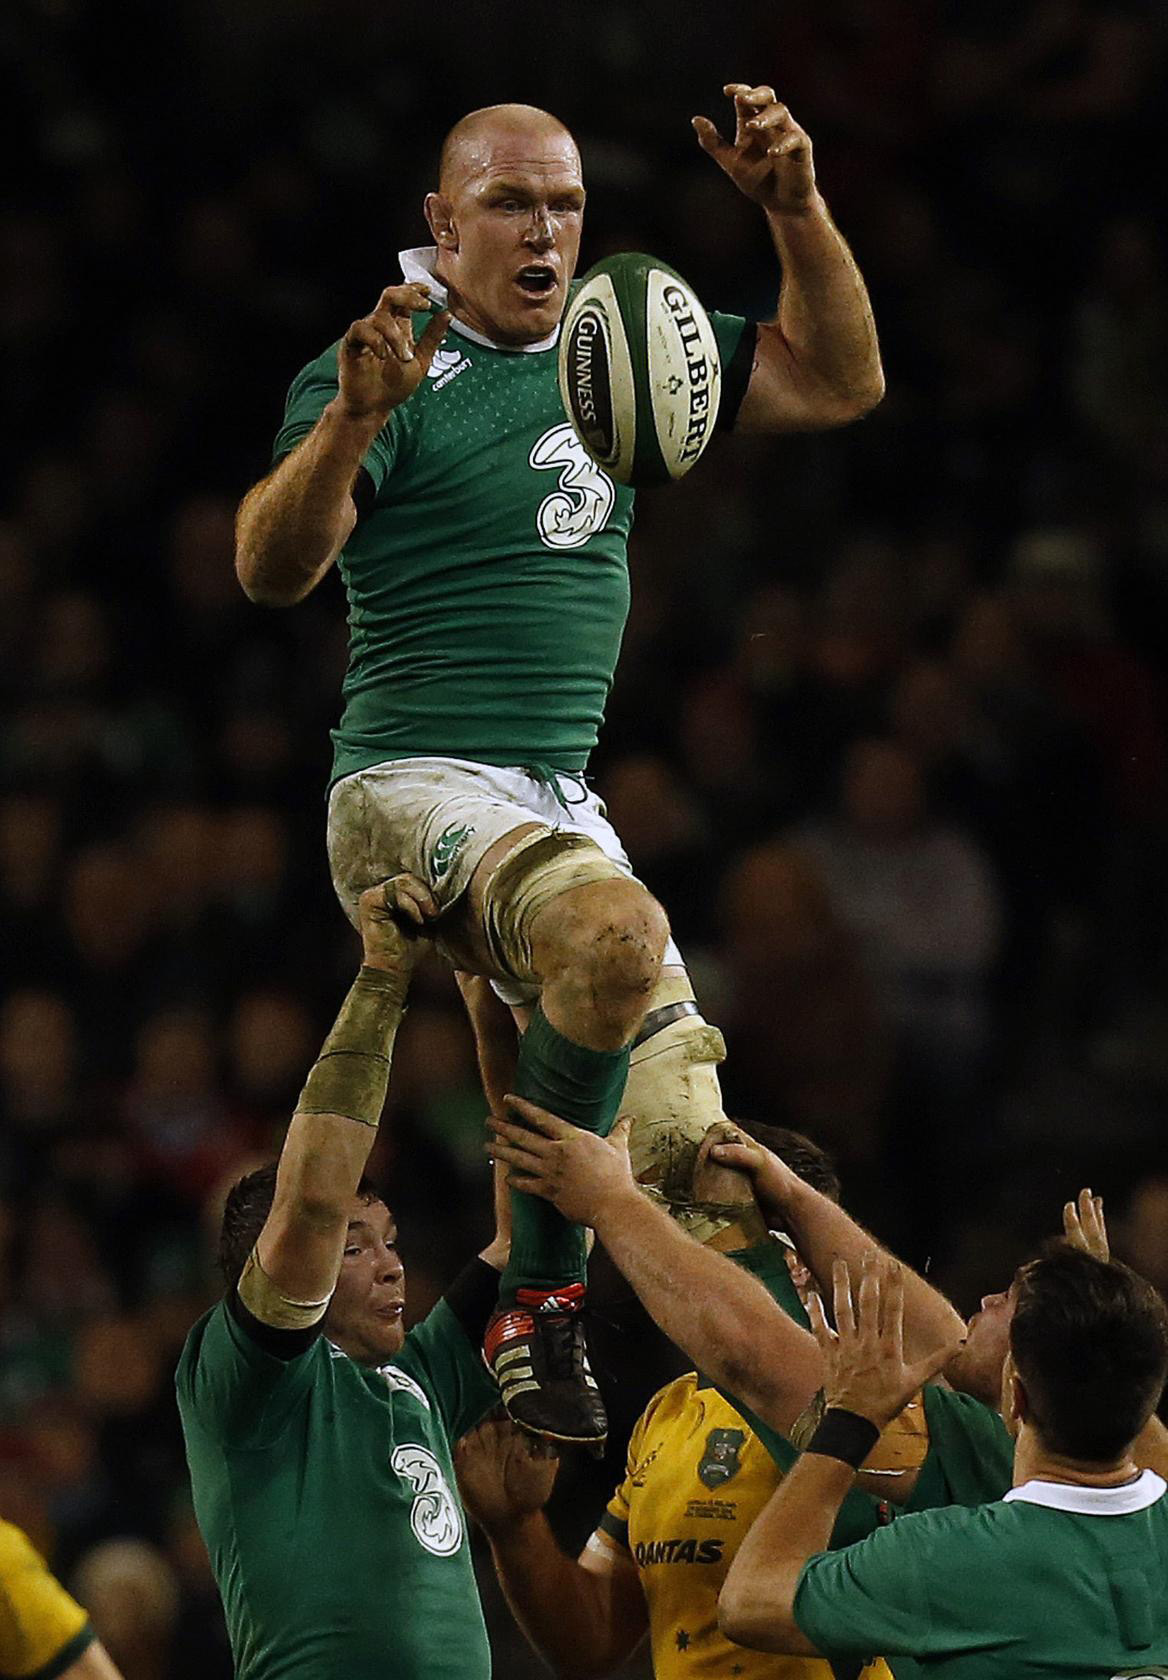 Former Ireland skipper Paul O'Connell announced his retirement from all rugby on Tuesday with immediate effect. Photo: Reuters